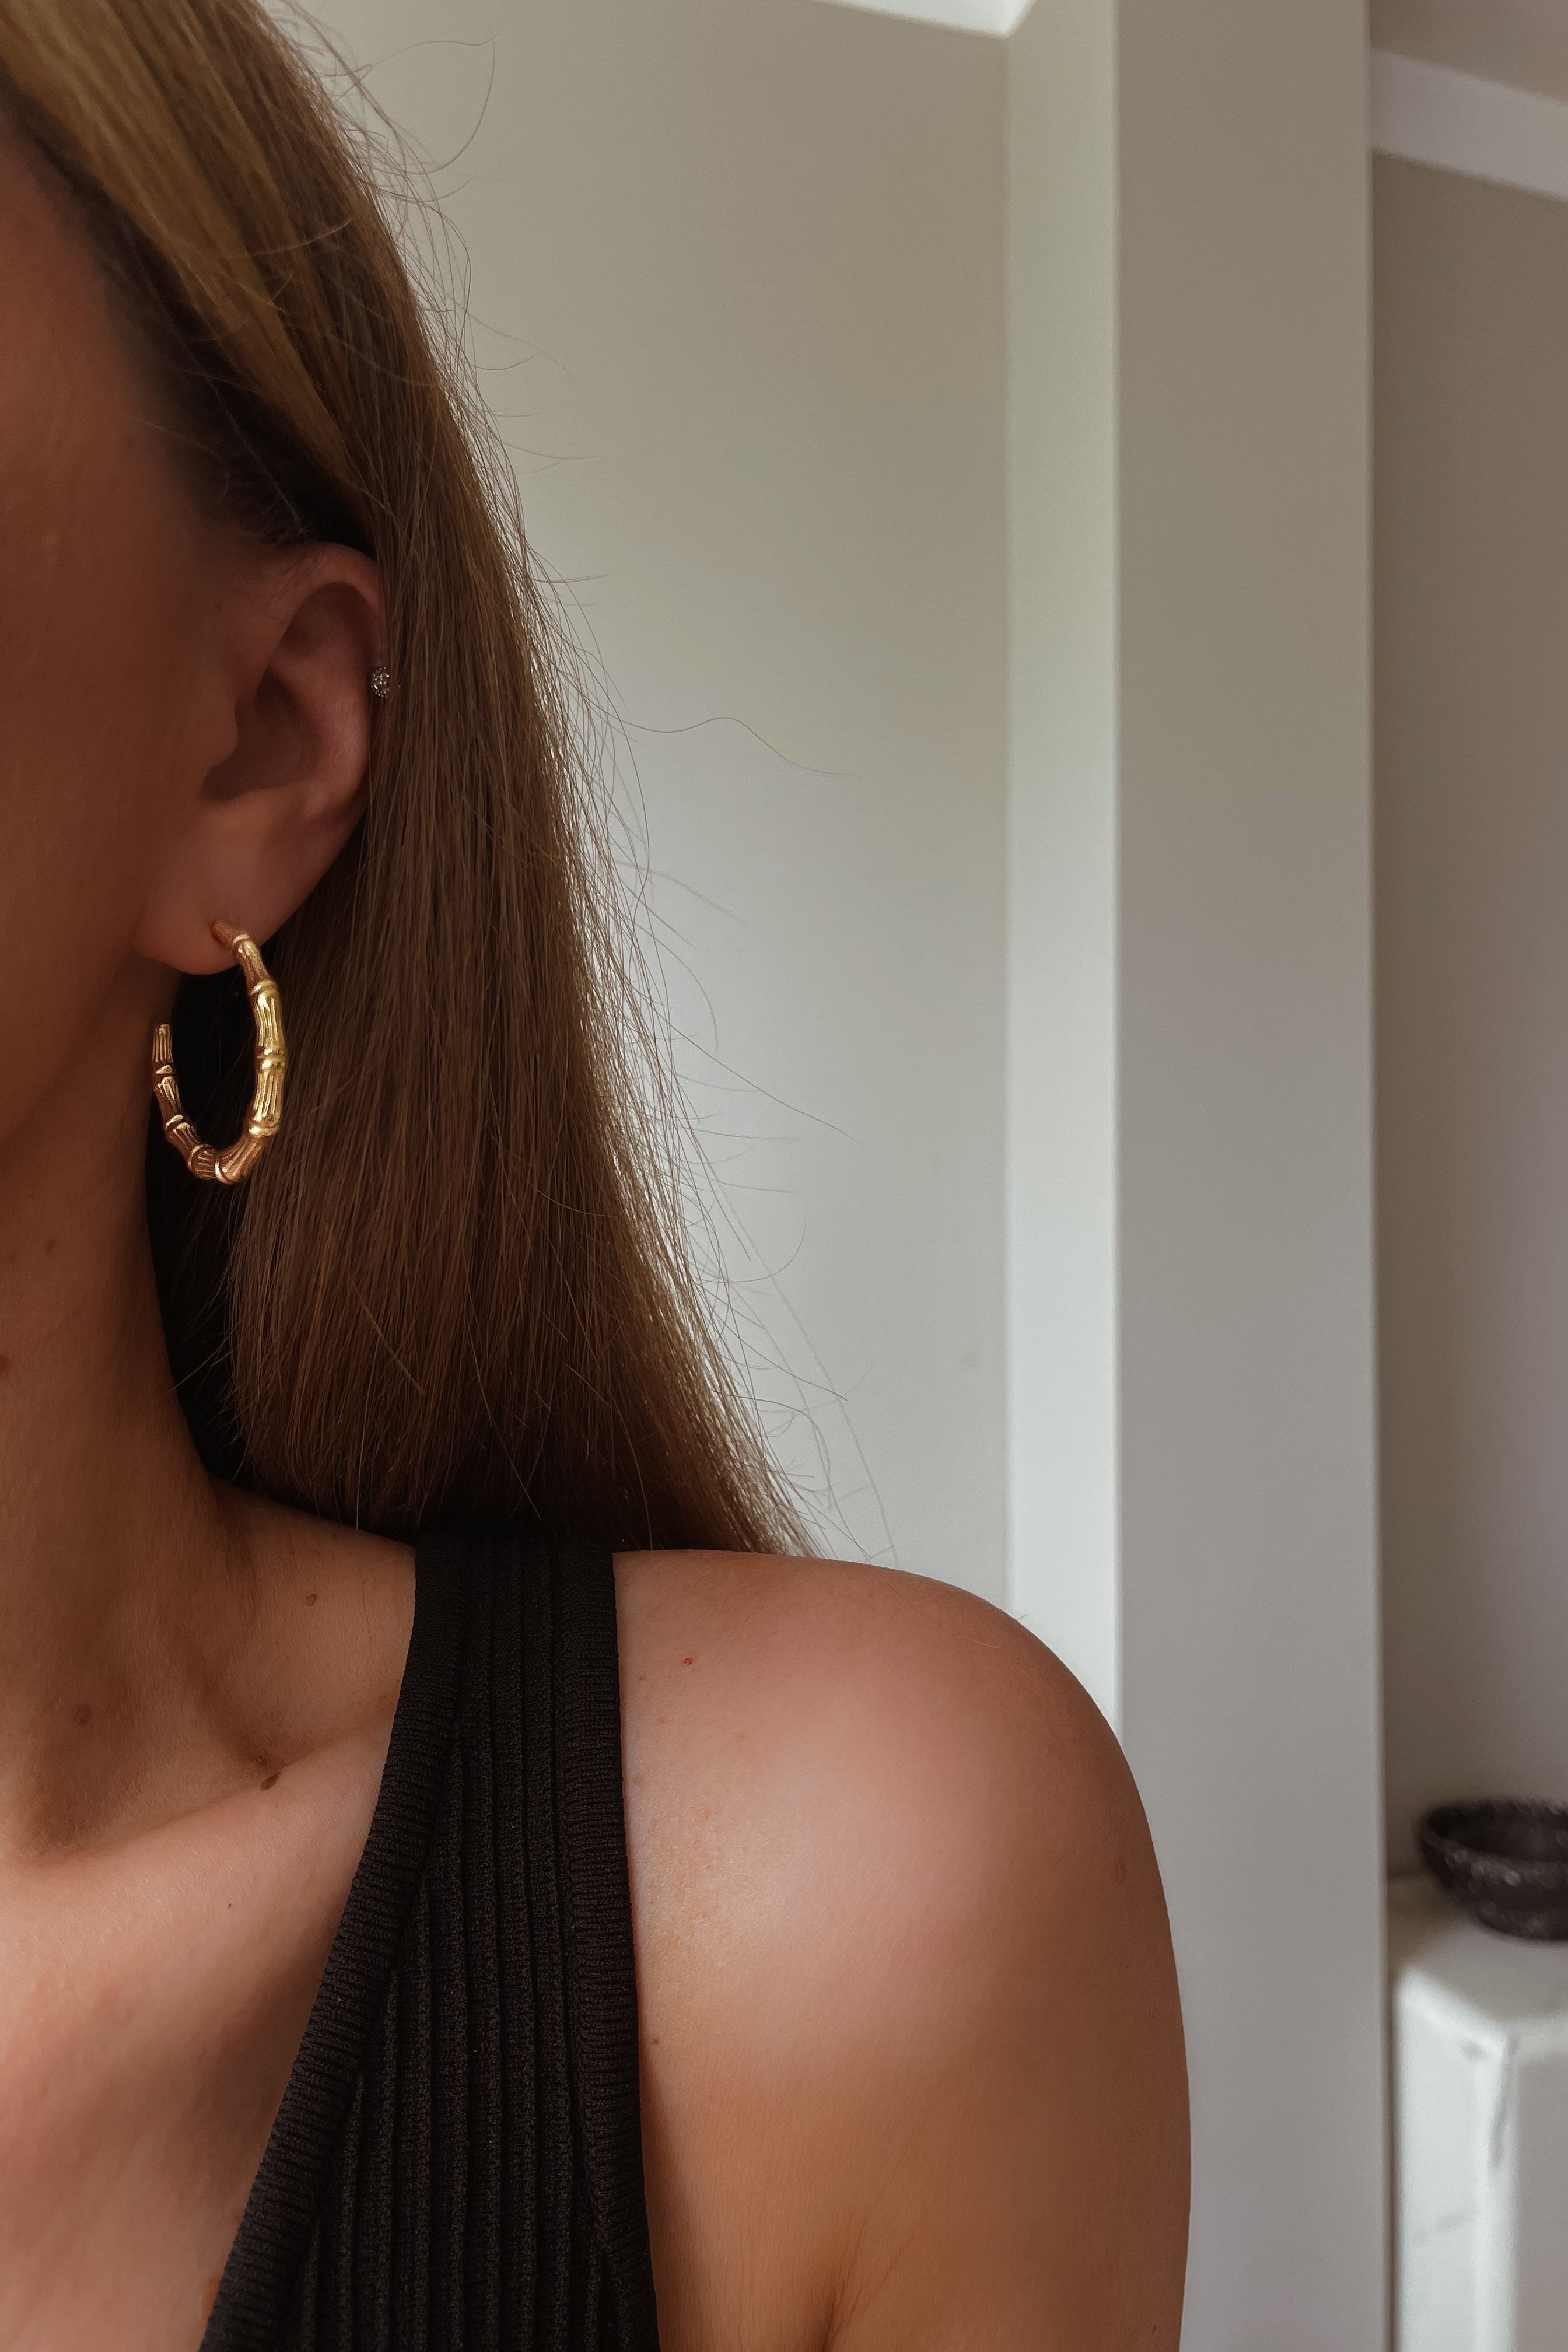 Xianna Hoops - Boutique Minimaliste has waterproof, durable, elegant and vintage inspired jewelry